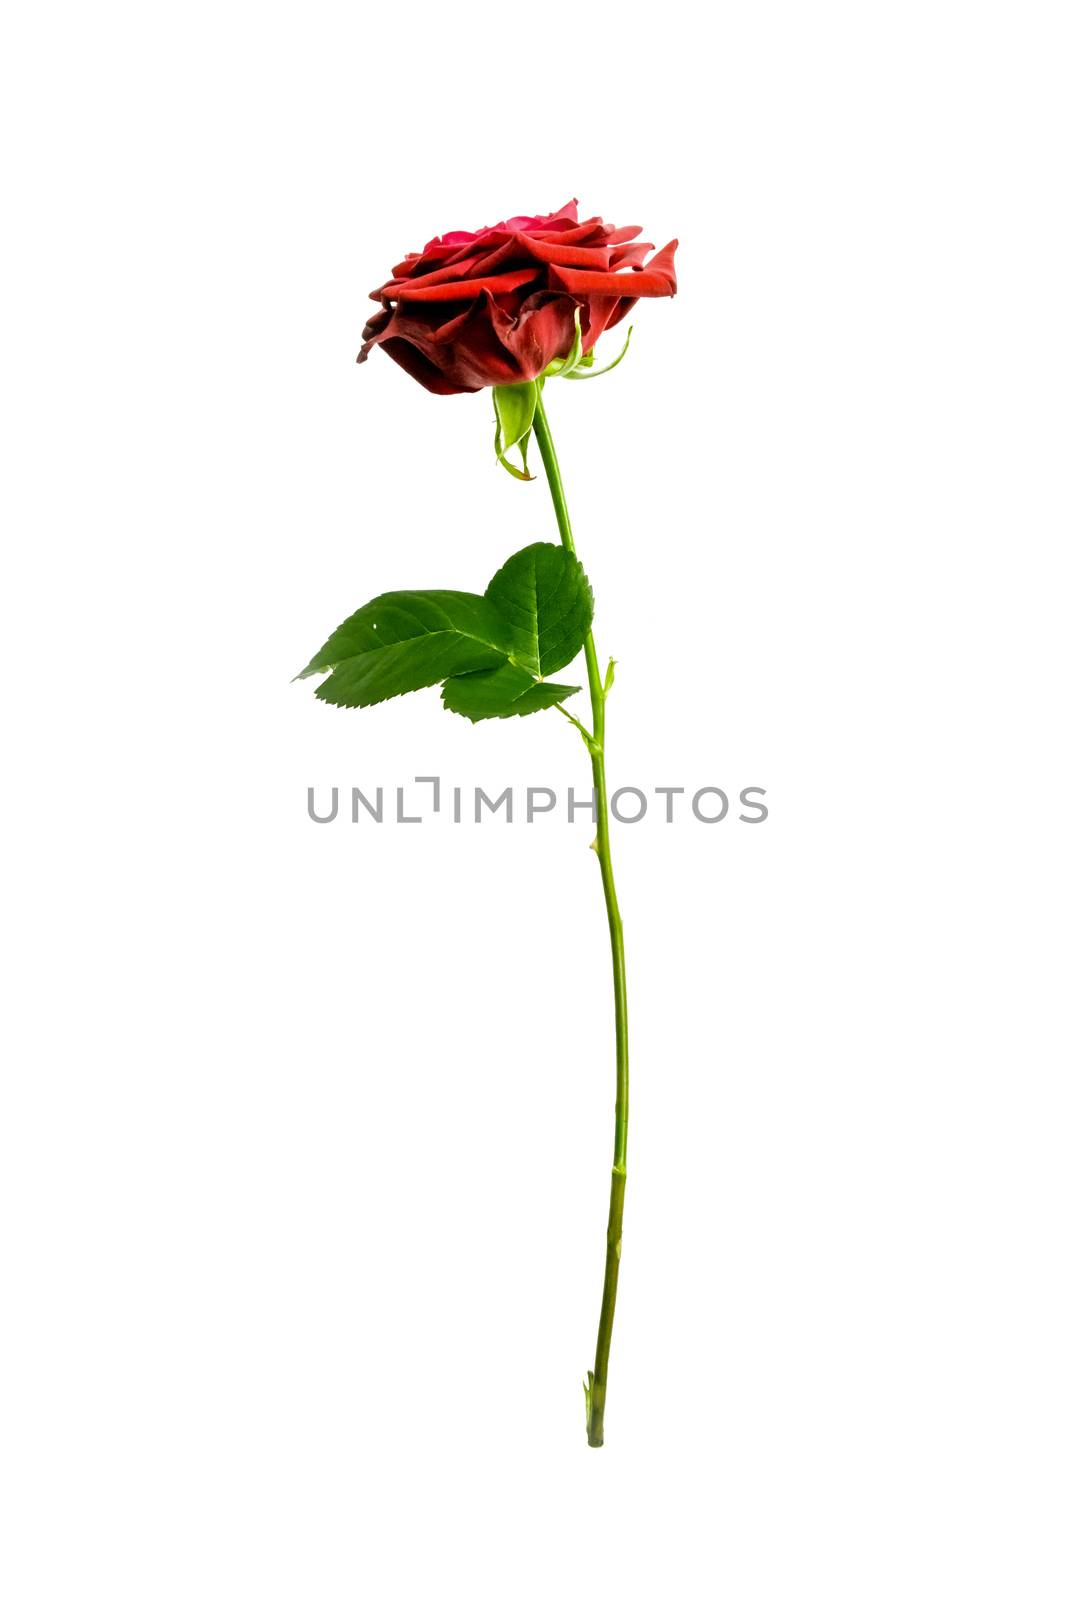 Red rose on a green stalk by Sportactive